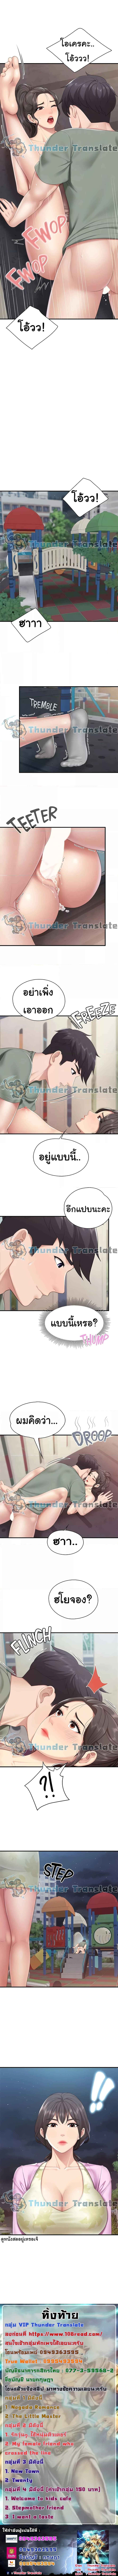 Welcome To Kids Cafe’ 27 ภาพ 4